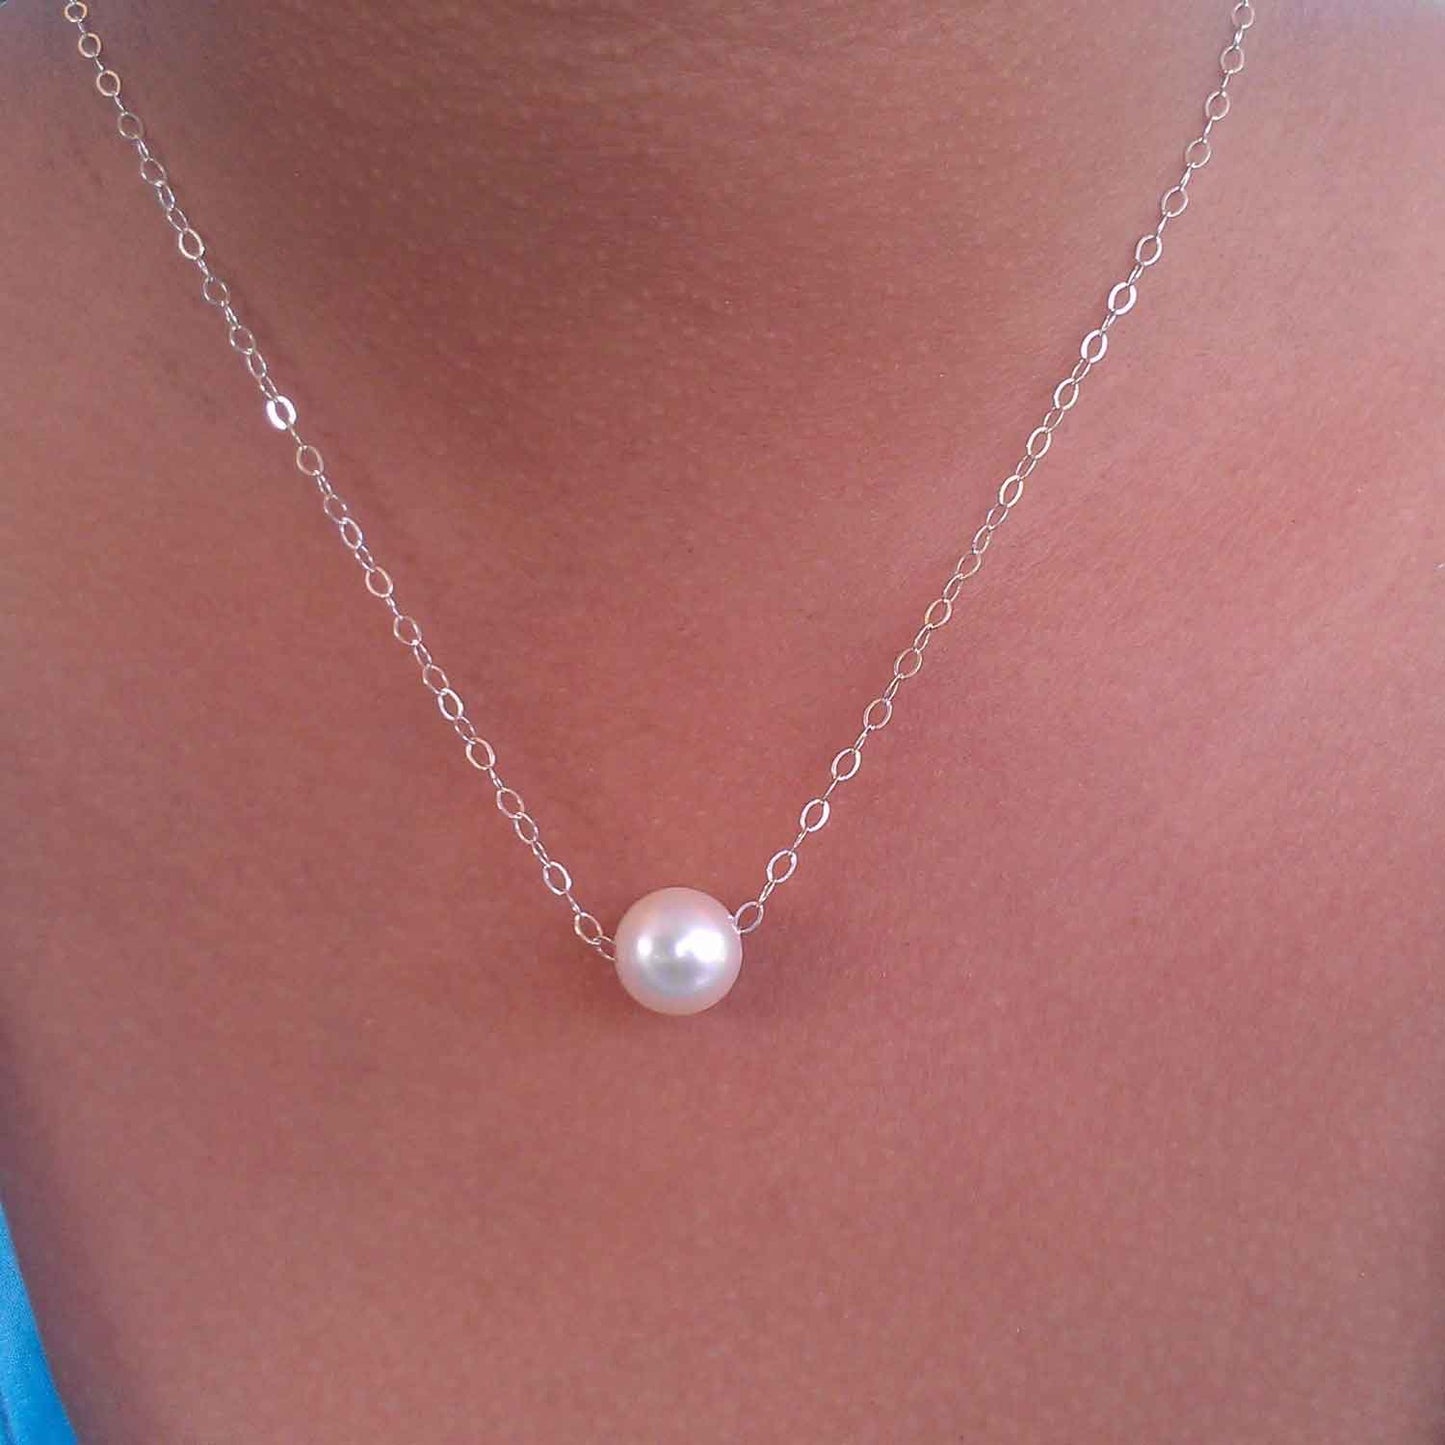 Floating pearl necklace in silver